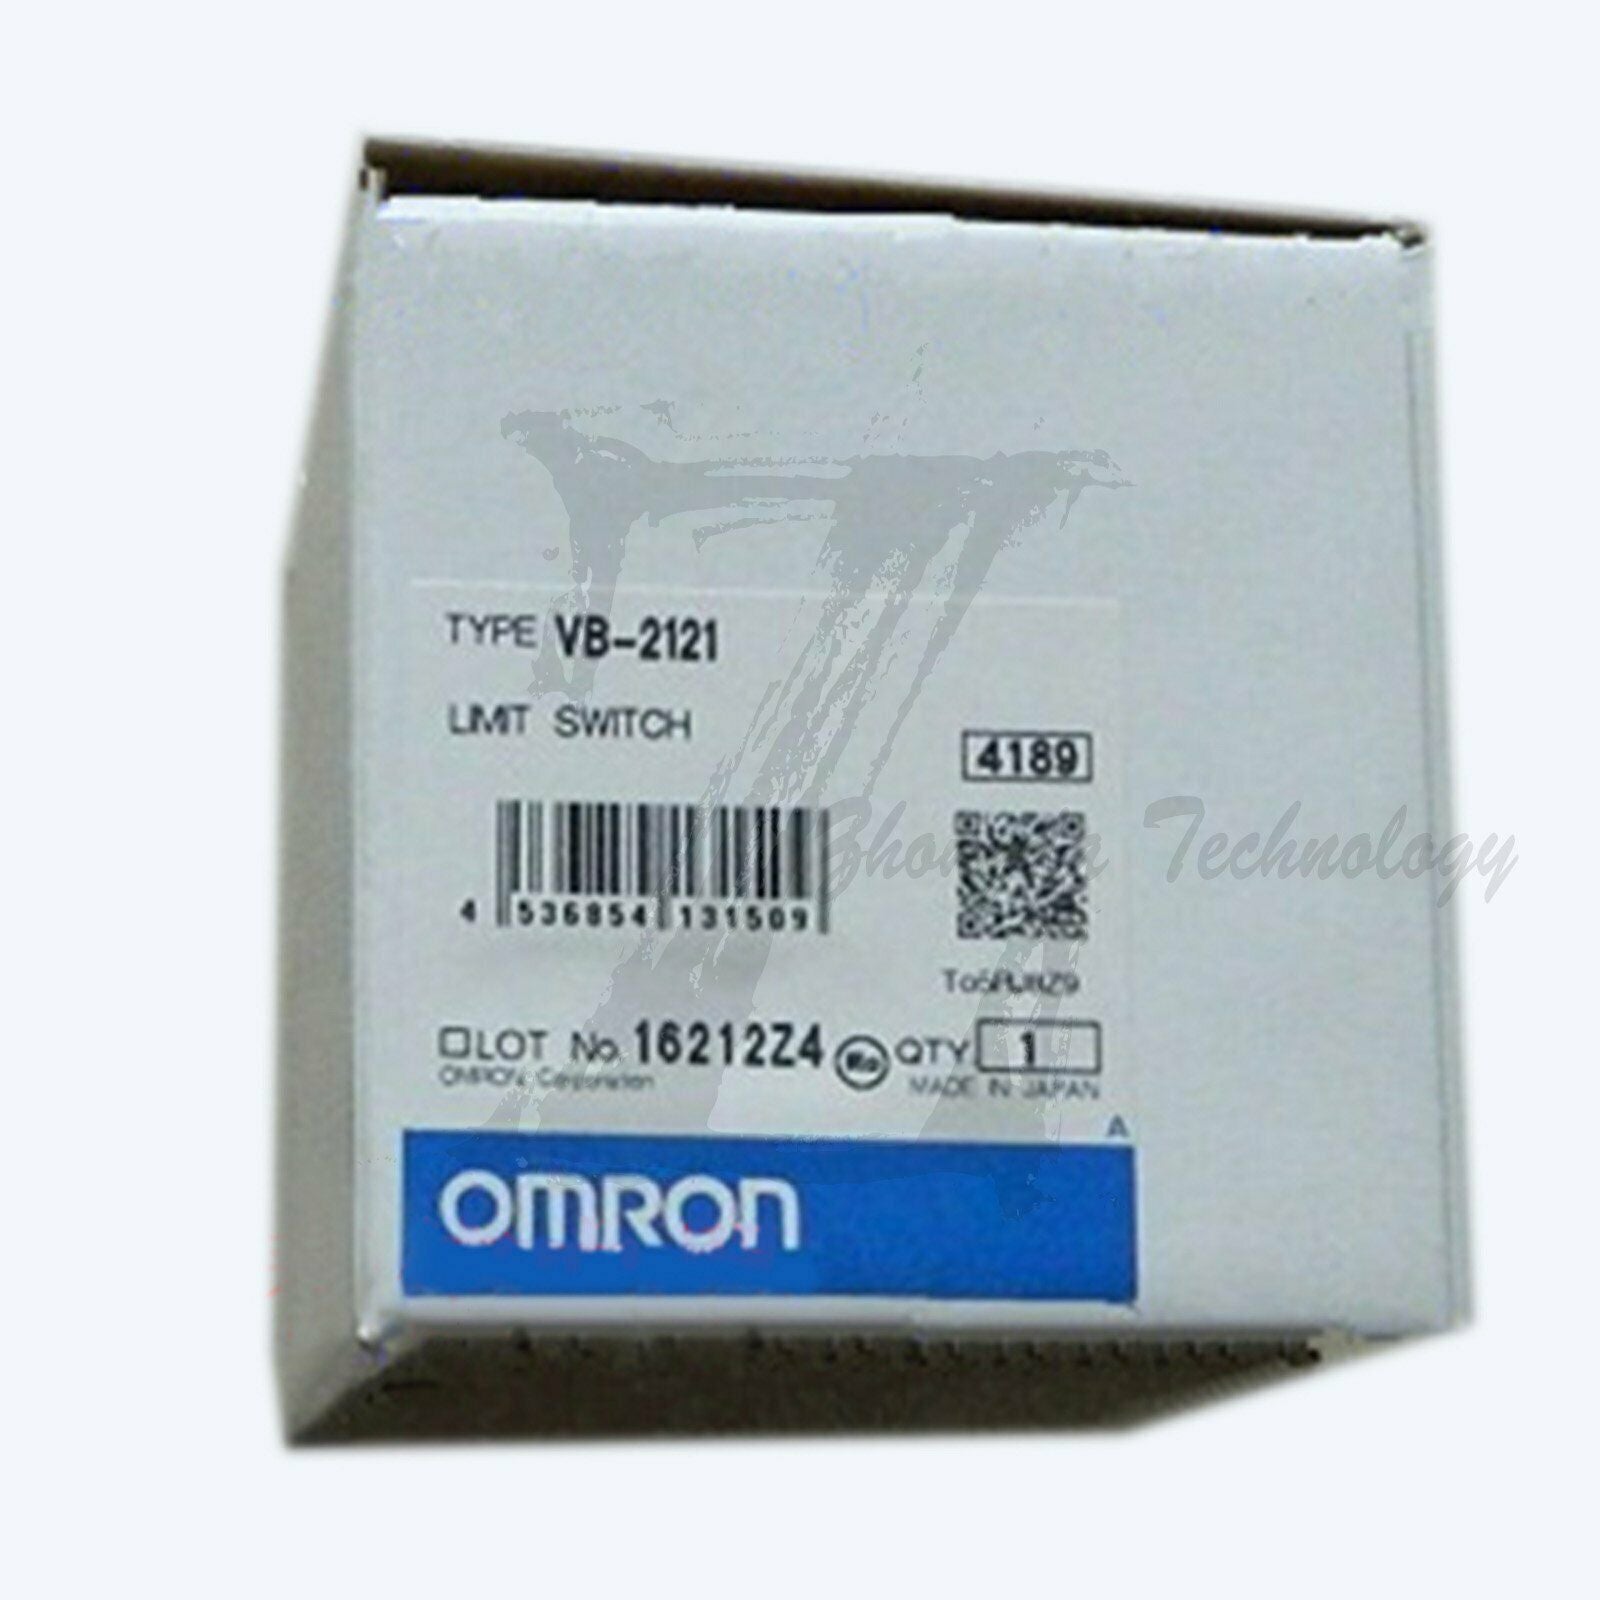 1pc new Omron travel switch VB-2121 one year warranty KOEED 101-200, 80%, import_2020_10_10_031751, Omron, Other